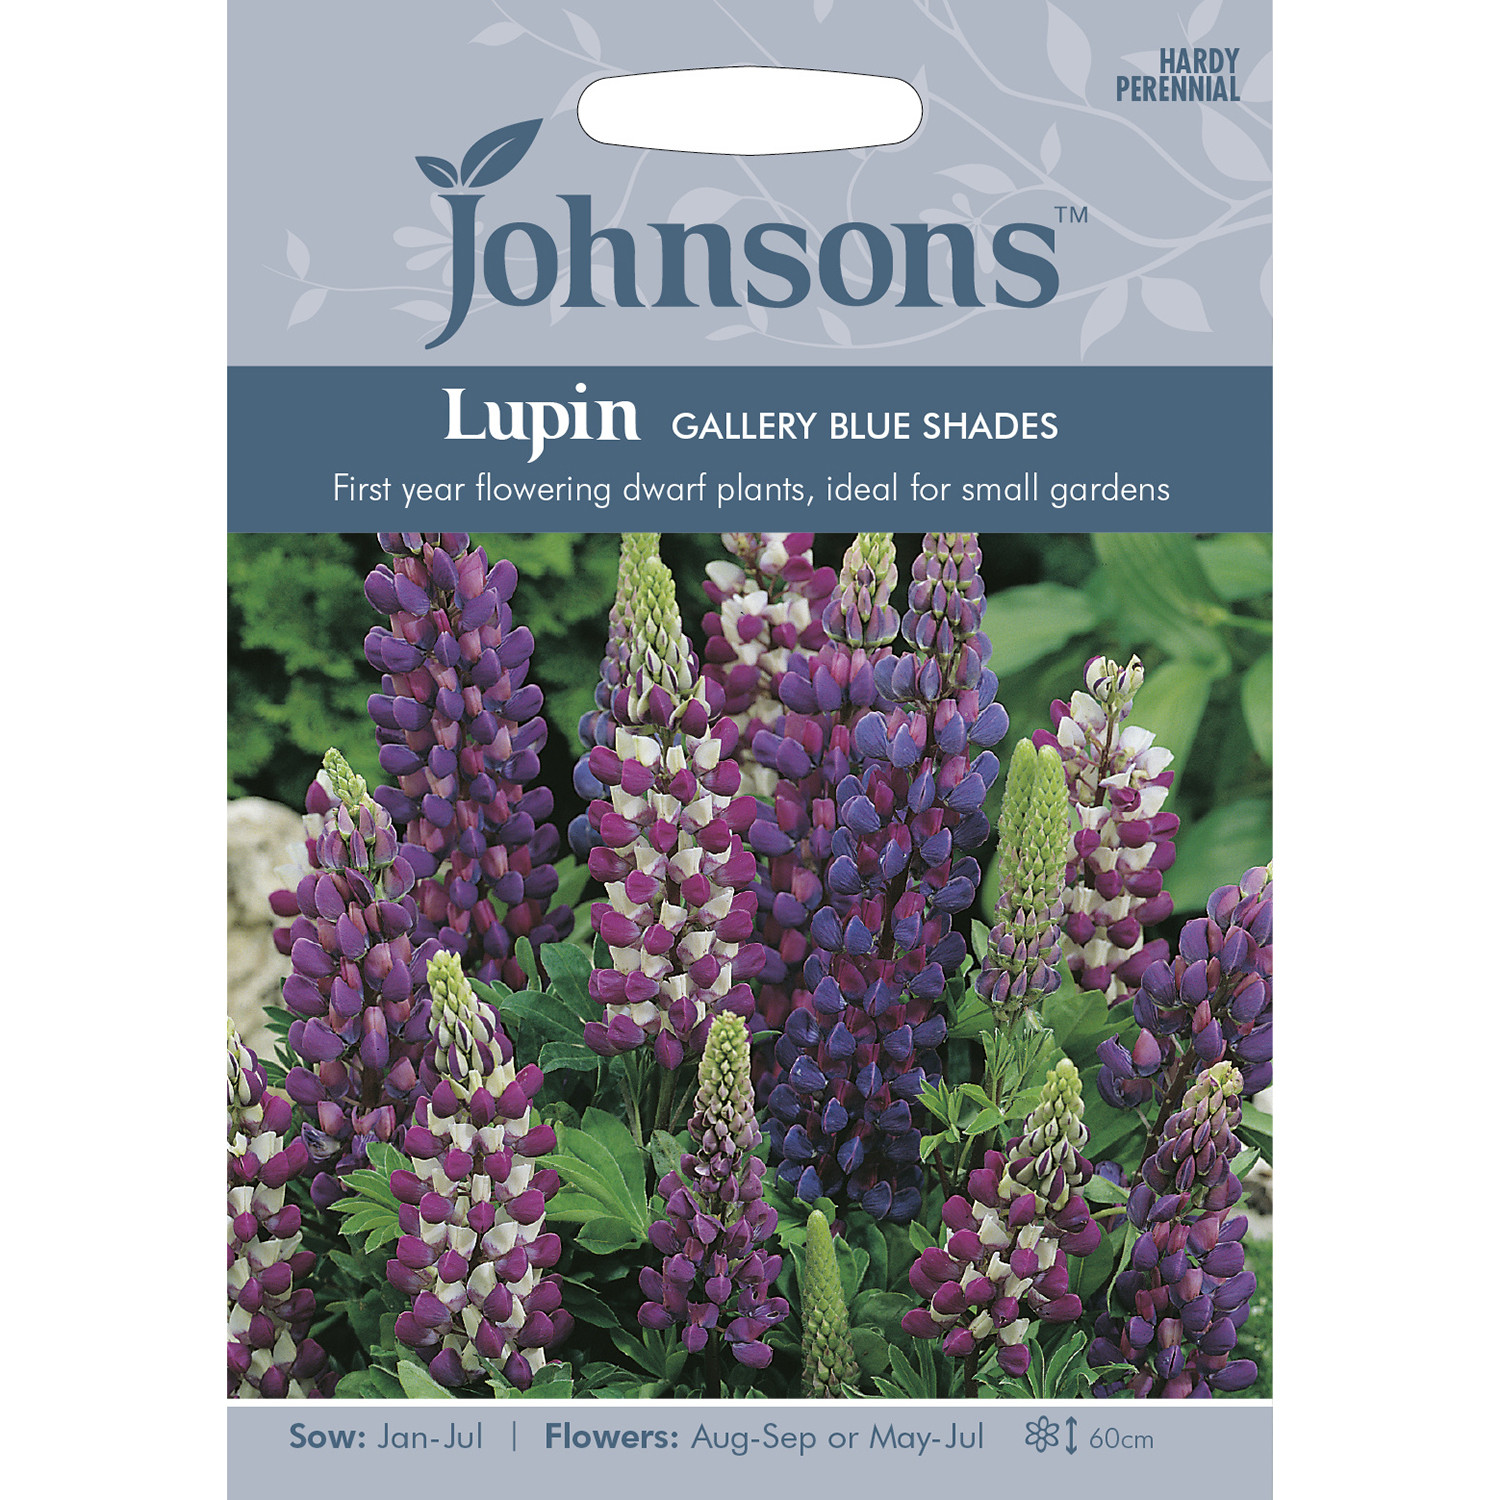 Johnsons Lupin Gallery Blue Shades Flower Seeds Image 2